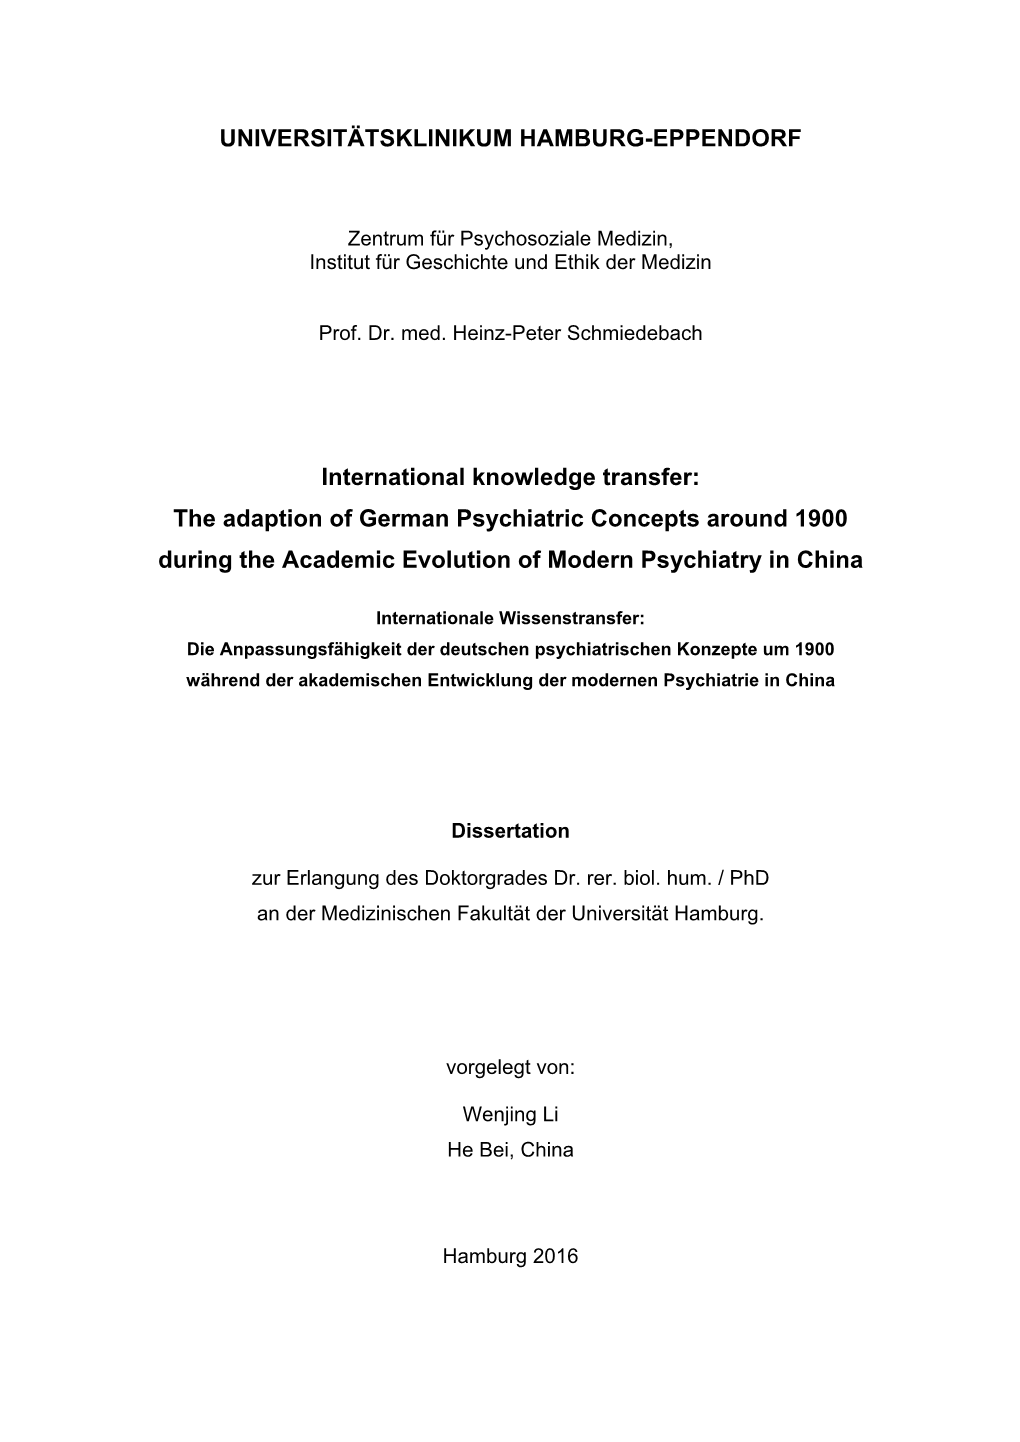 The Adaption of German Psychiatric Concepts Around 1900 During the Academic Evolution of Modern Psychiatry in China